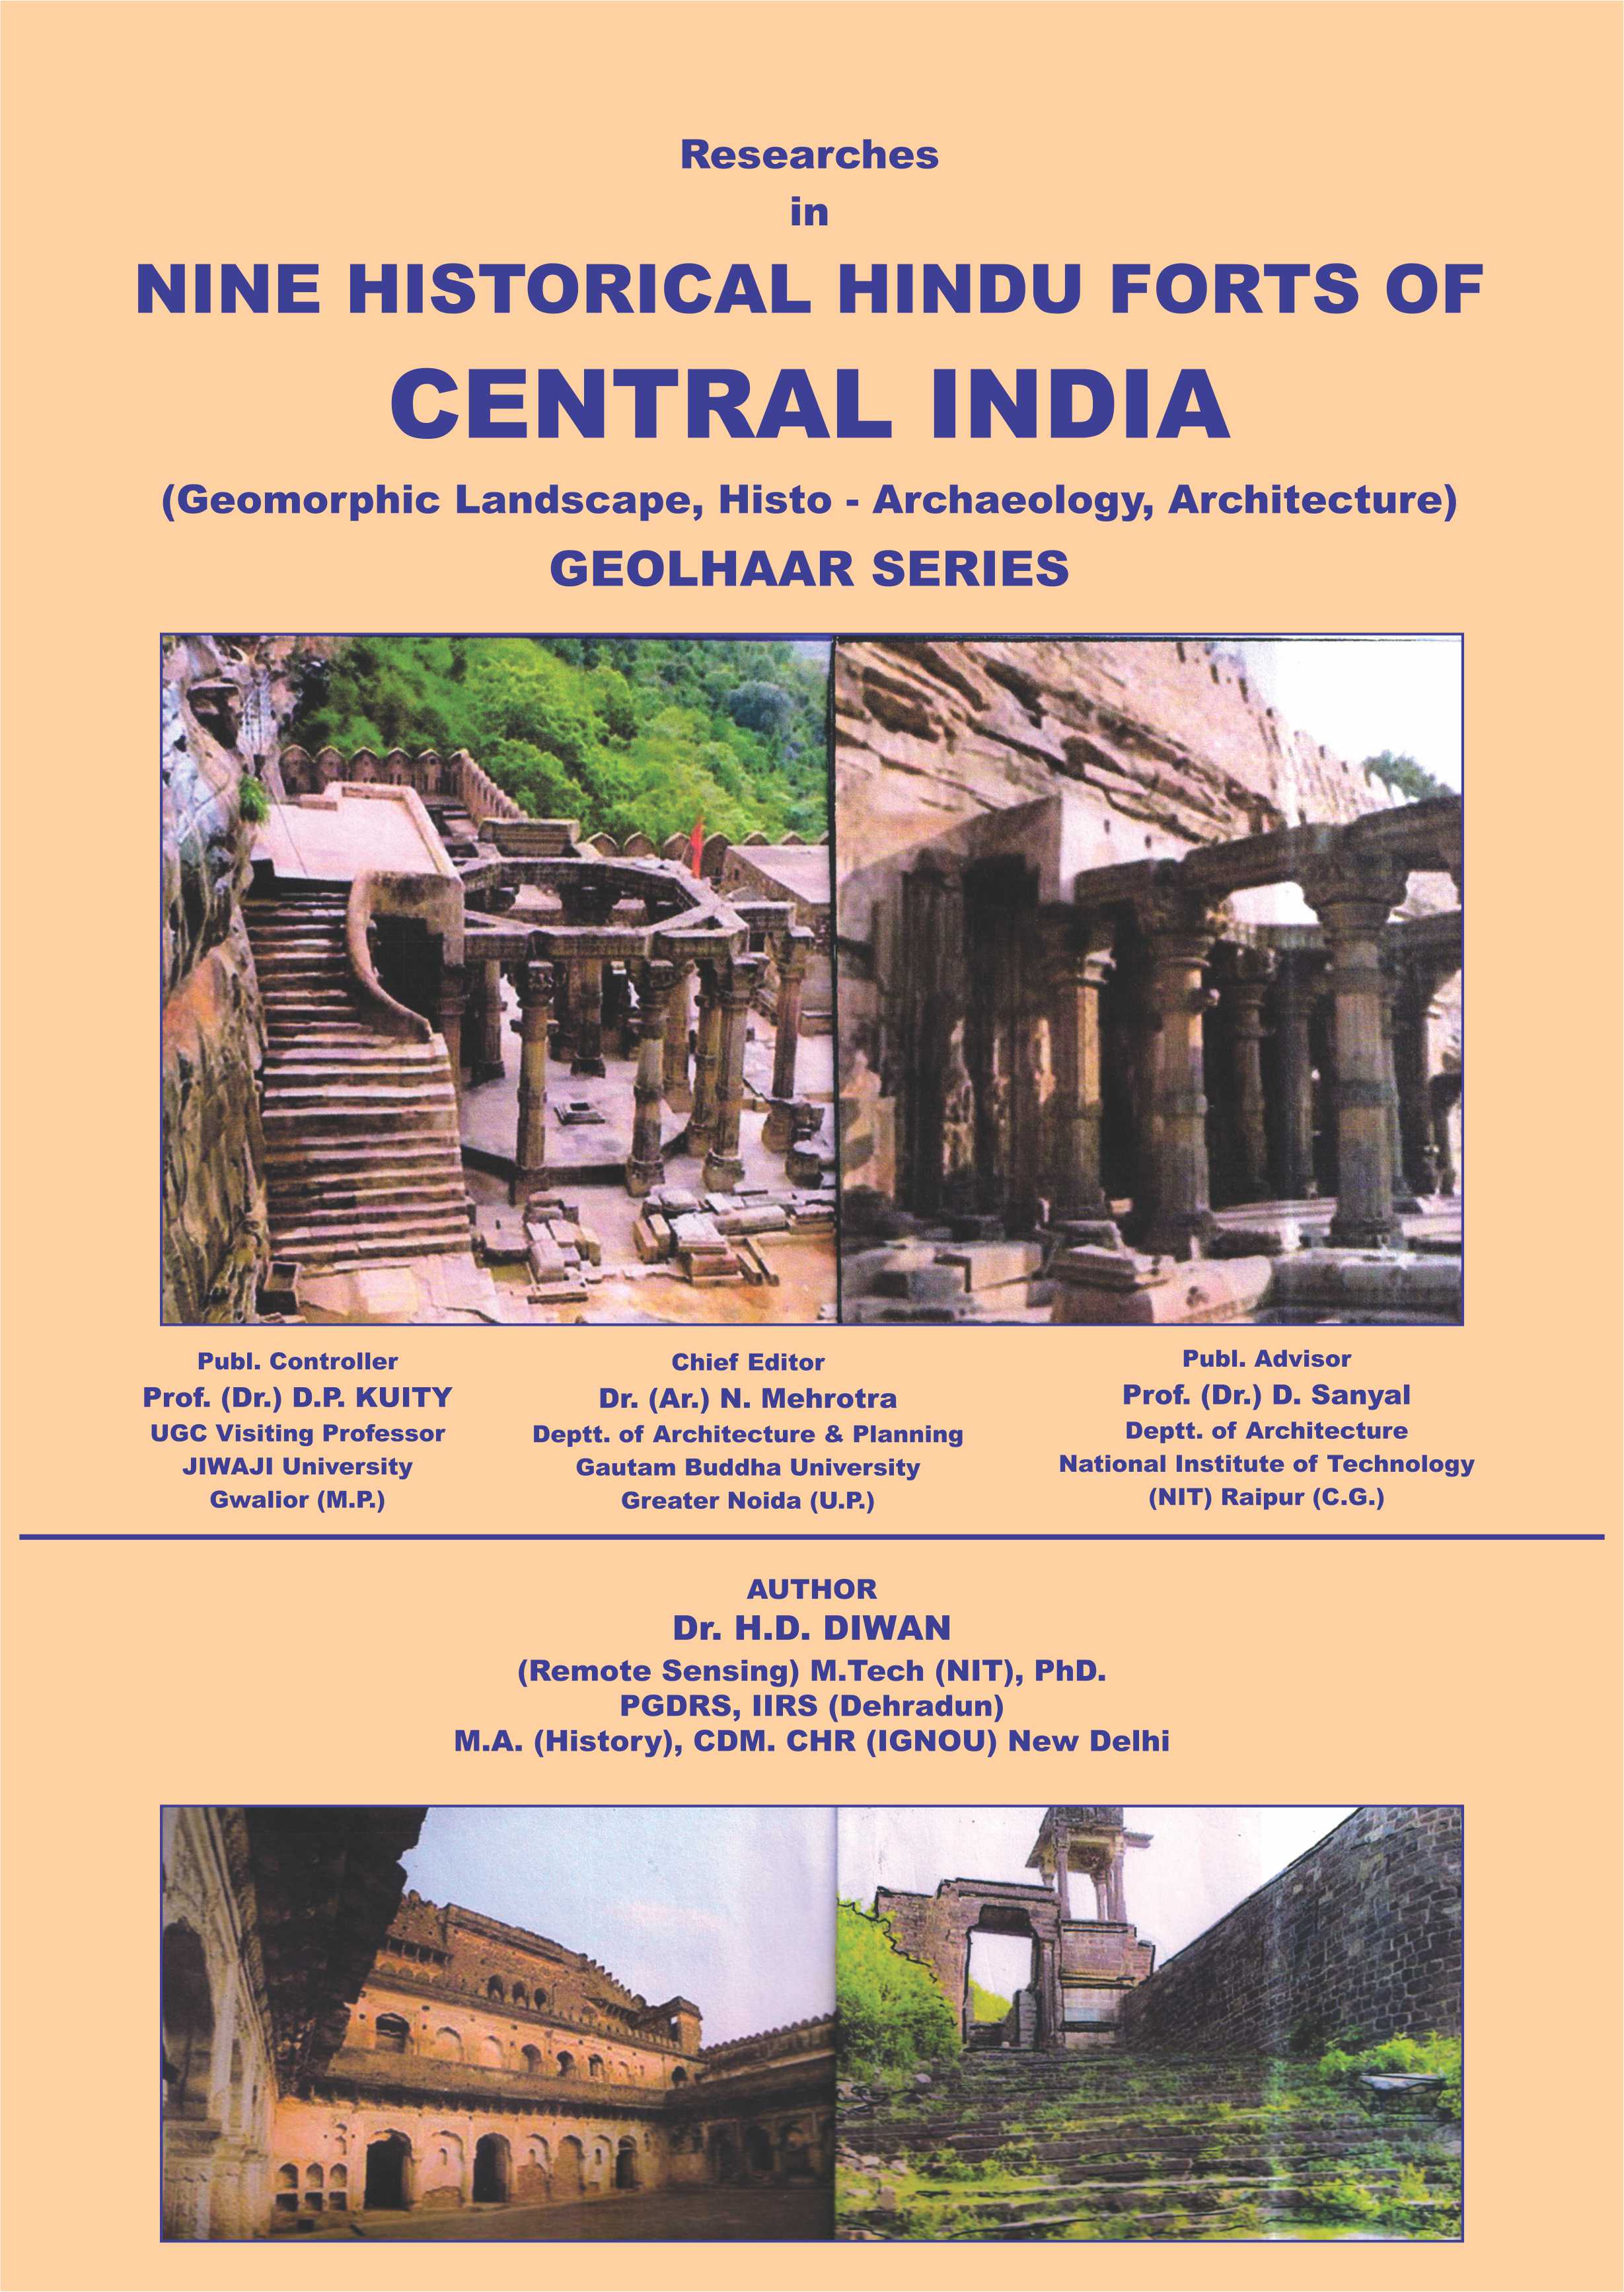 Researches in NINE HISTORIAL HINDU FORTS OF CENTRAL INDIA (Geomorphic Landscape, Histo-Archaecology, Architecture) GEOLHAAR SERIES